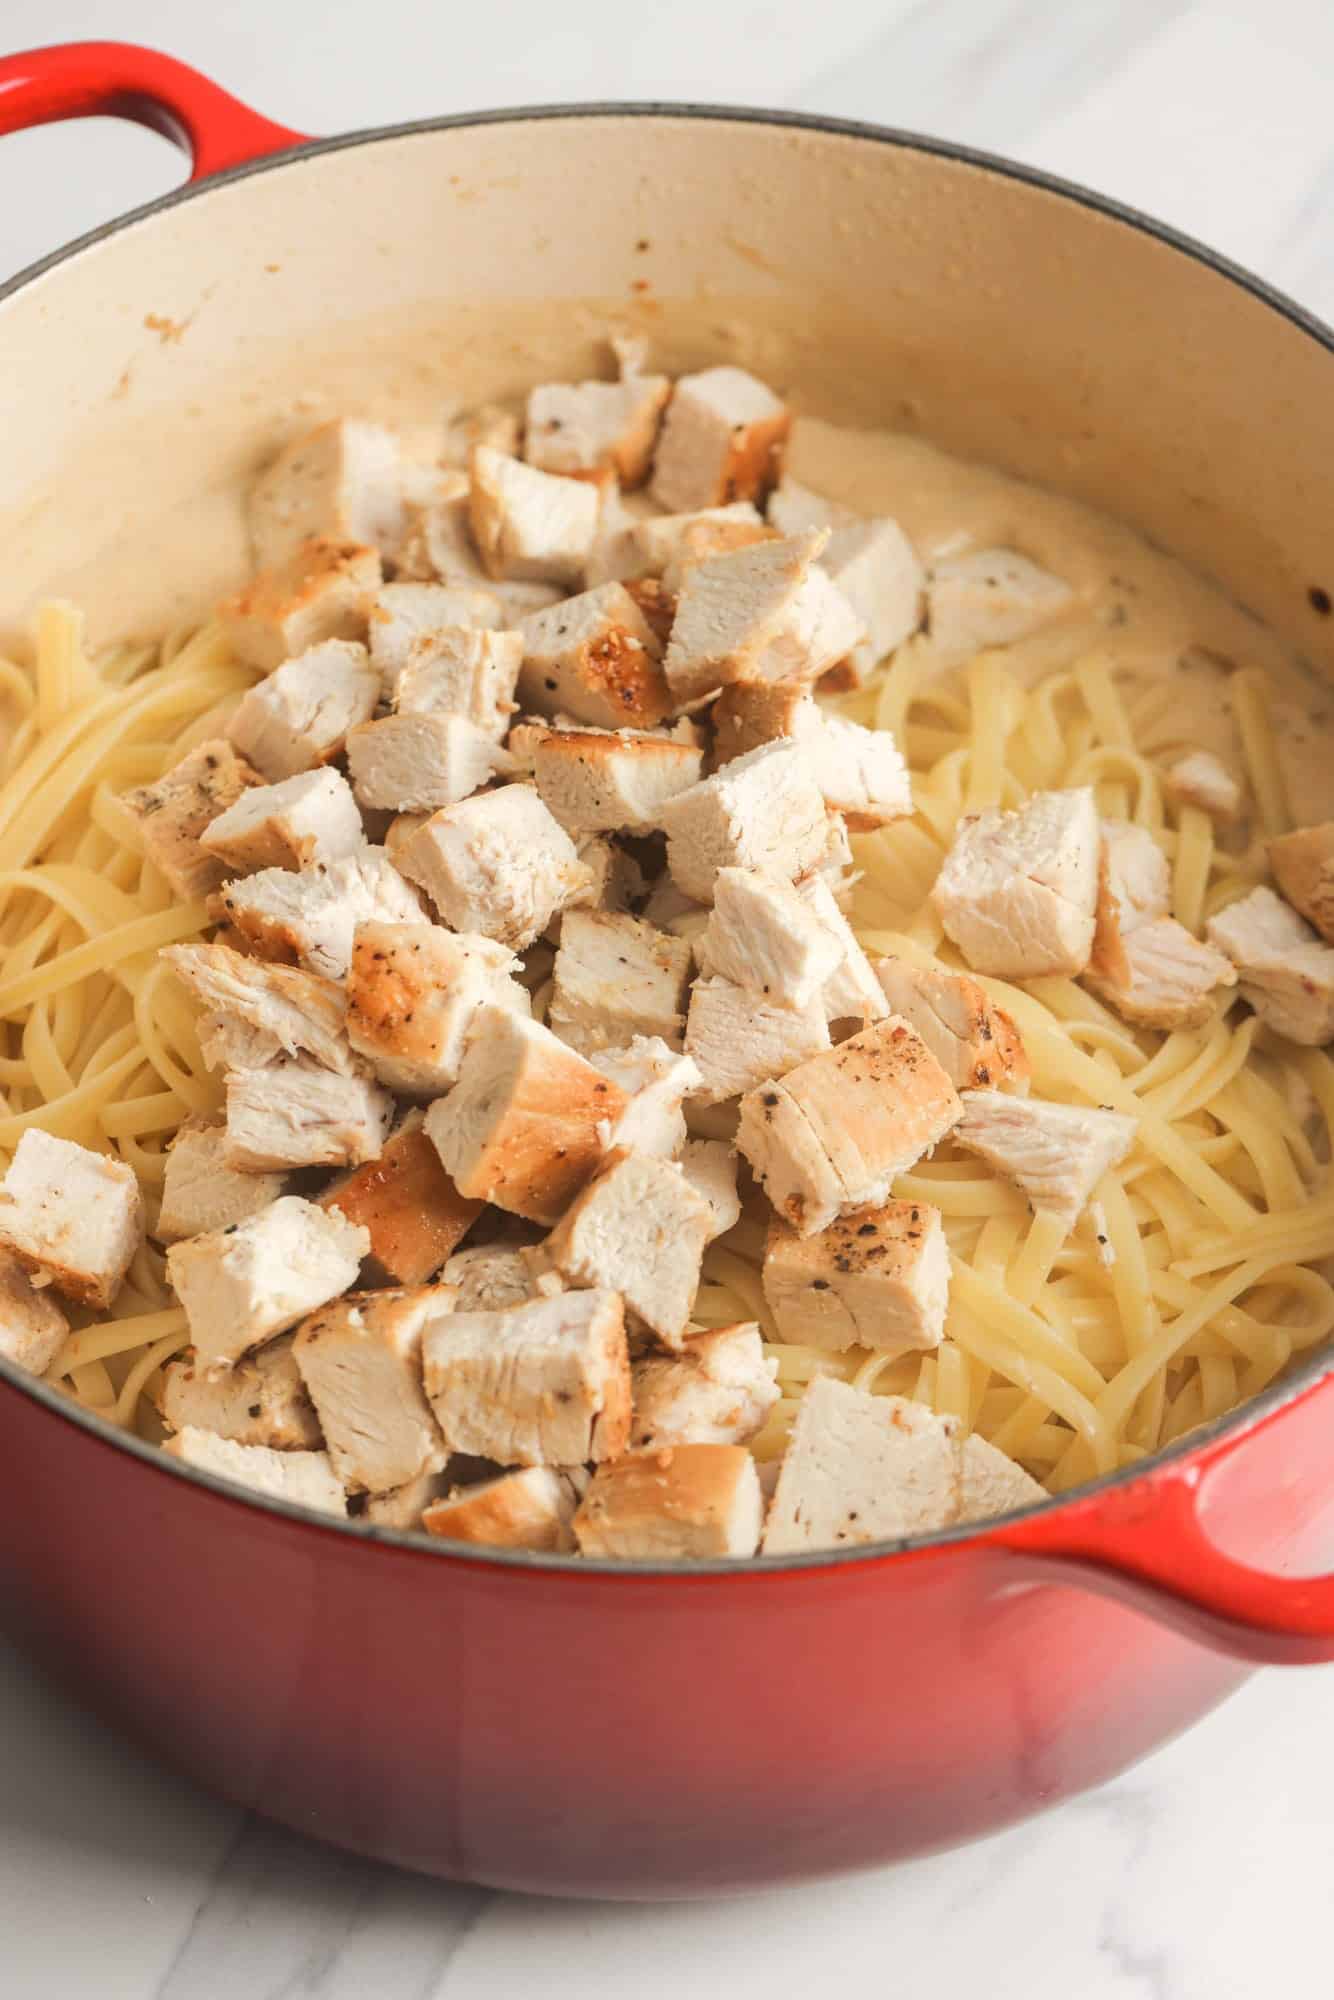 diced chicken added to pasta and tetrazzini sauce in a pan